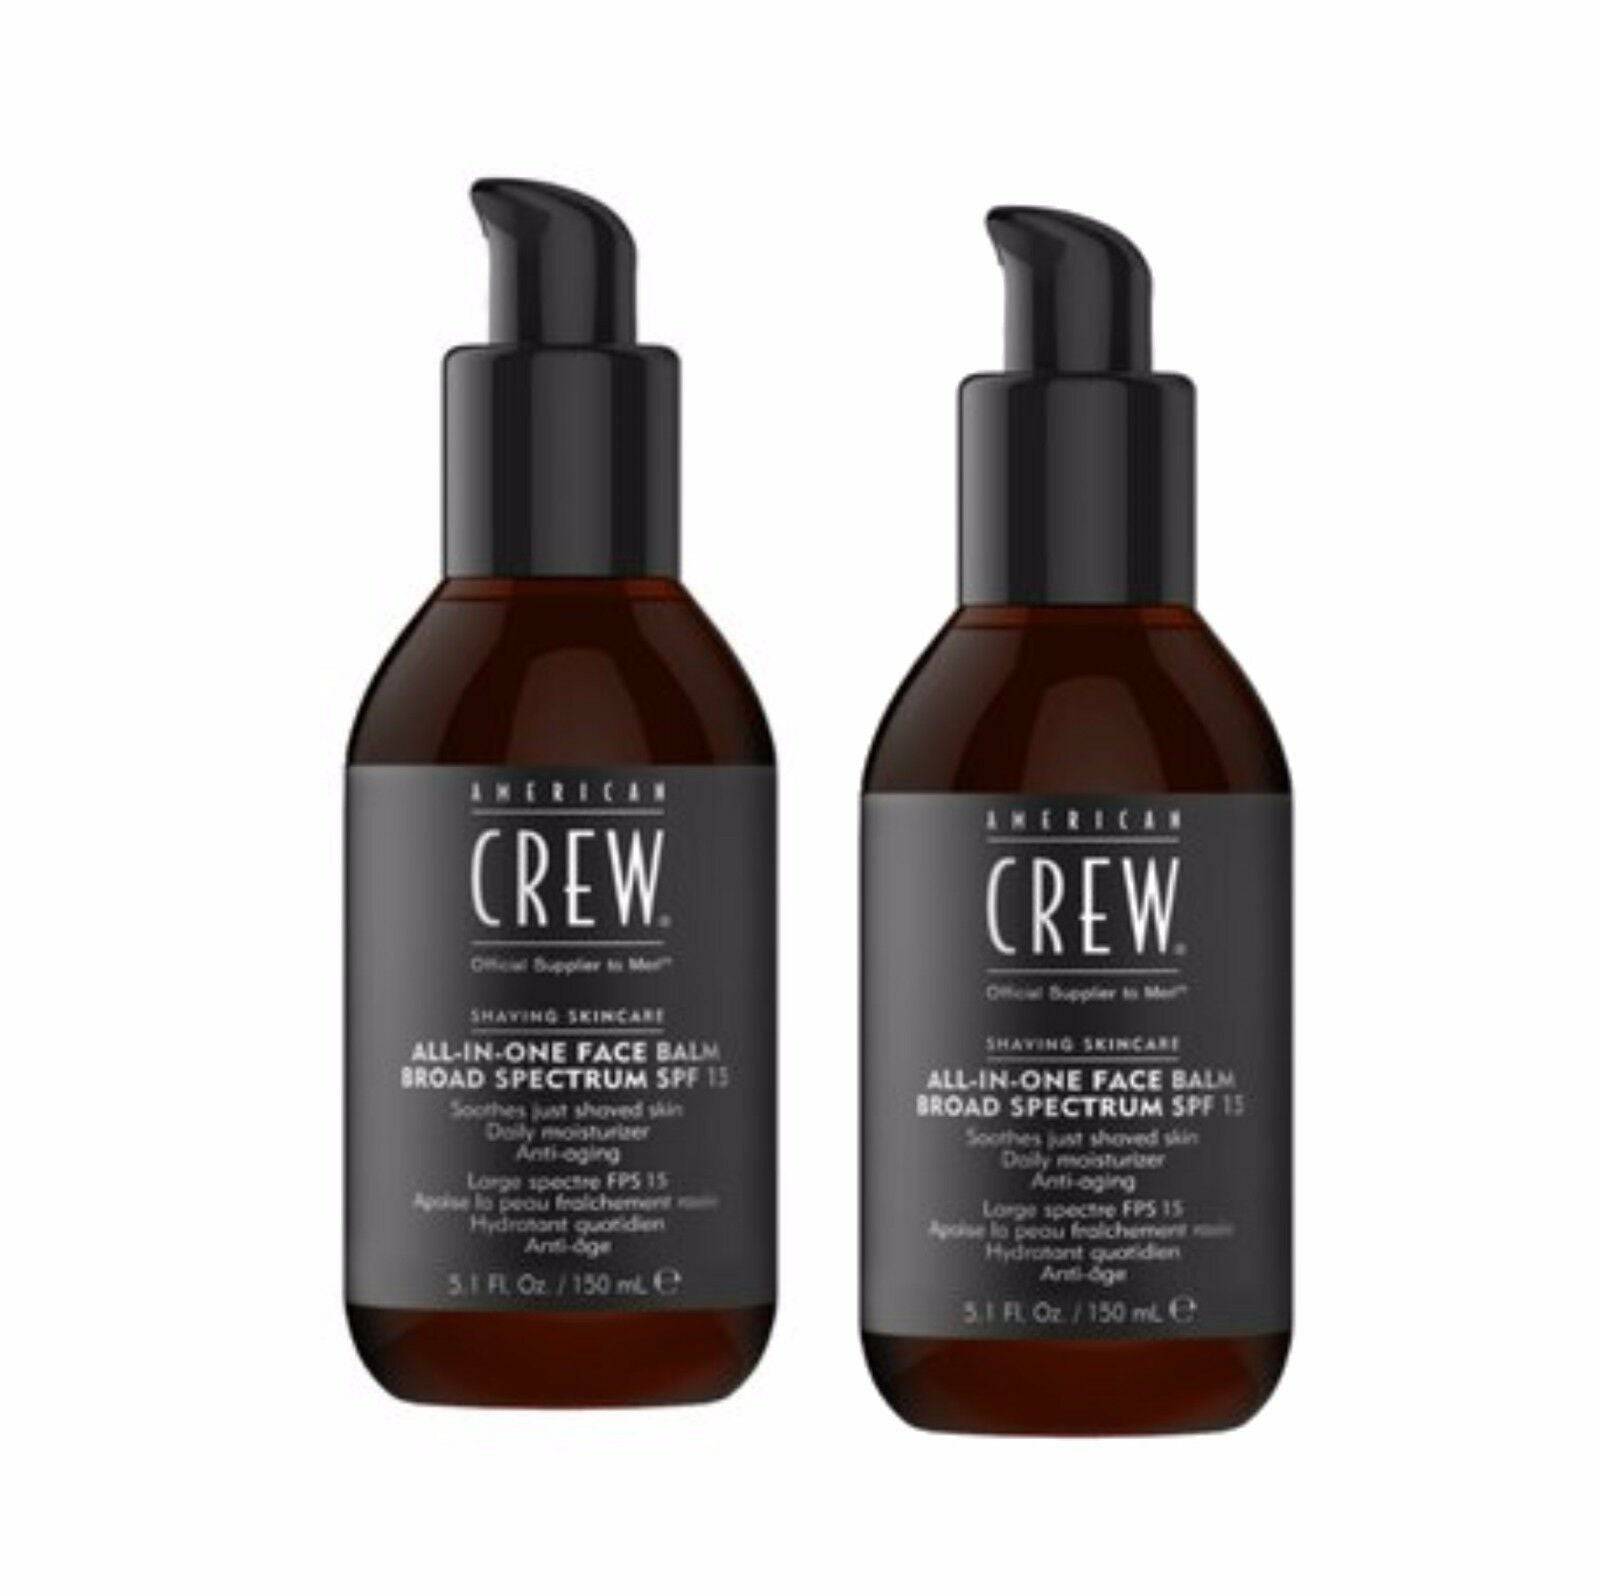 American Crew Shaving Skincare All in One Face Balm SPF15 Duo 2 x 170ml - On Line Hair Depot